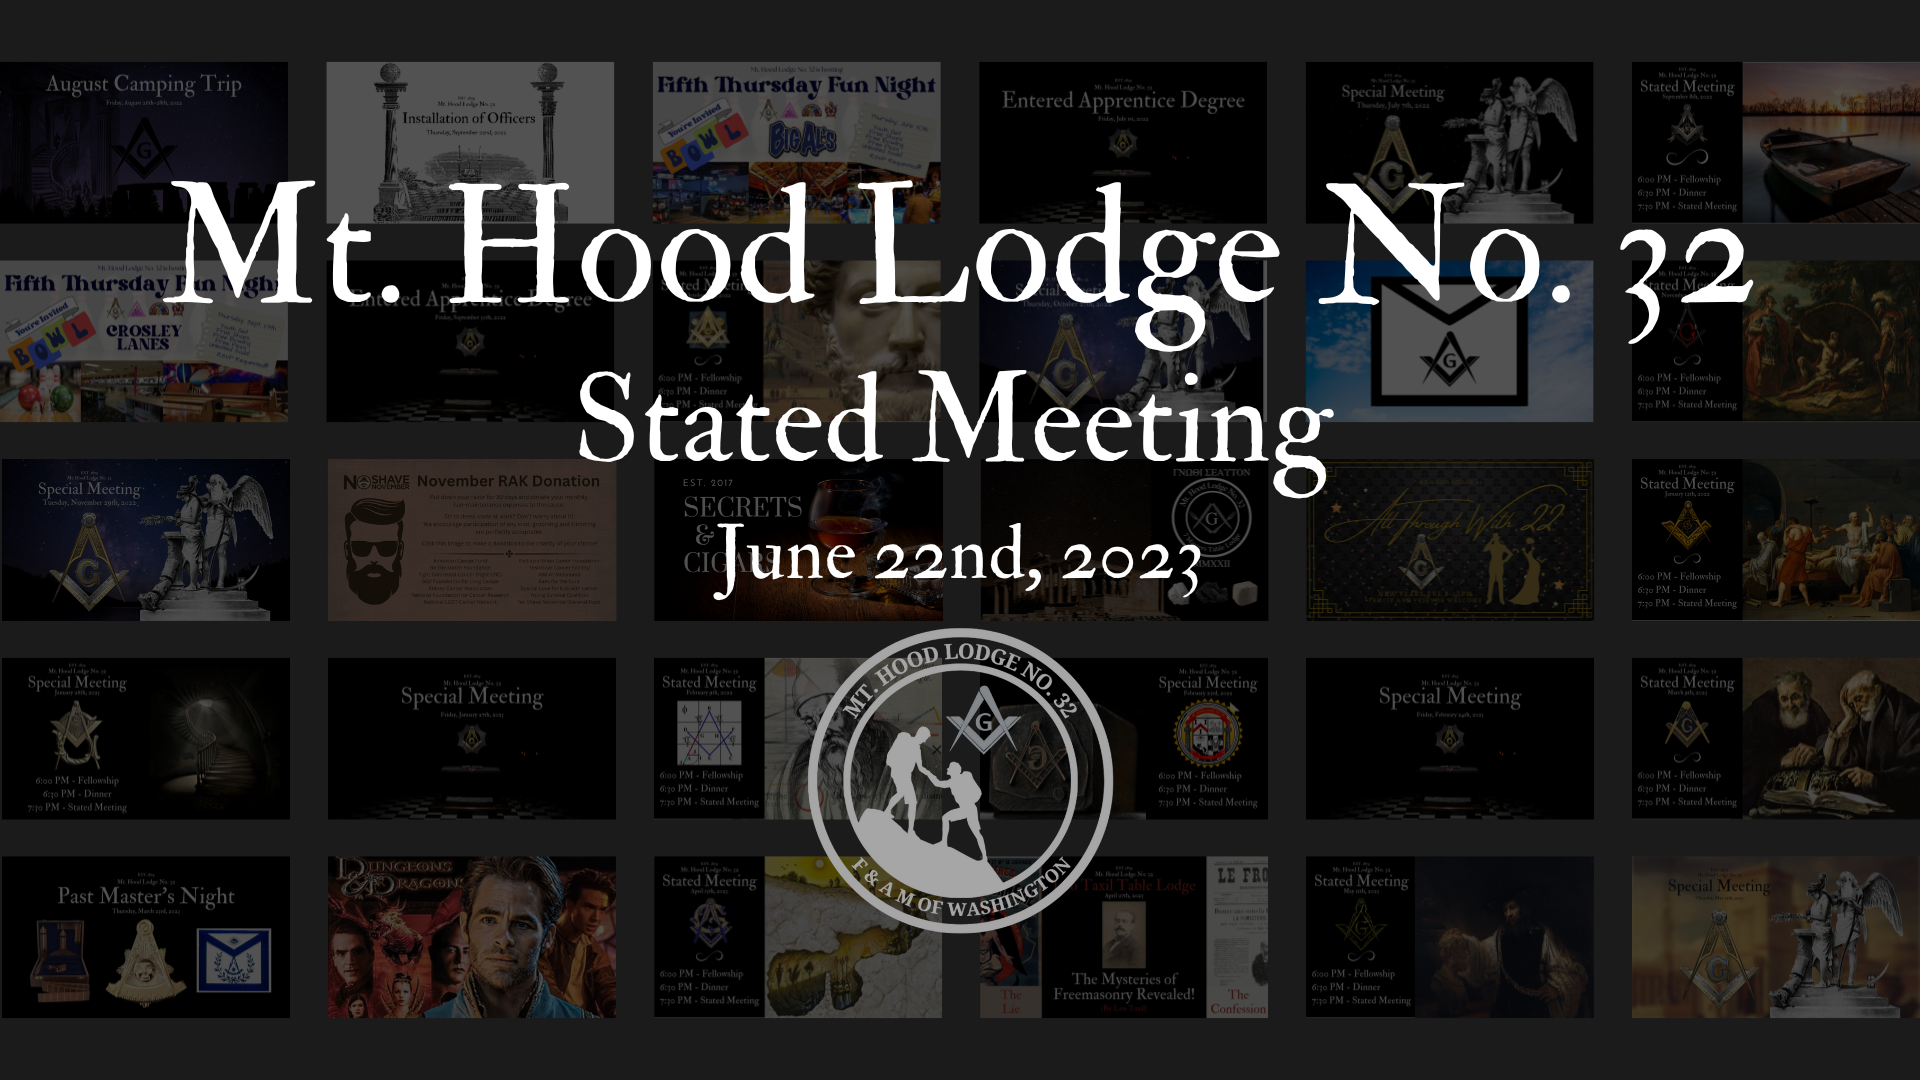 Stated Meeting – June 22nd, 2023